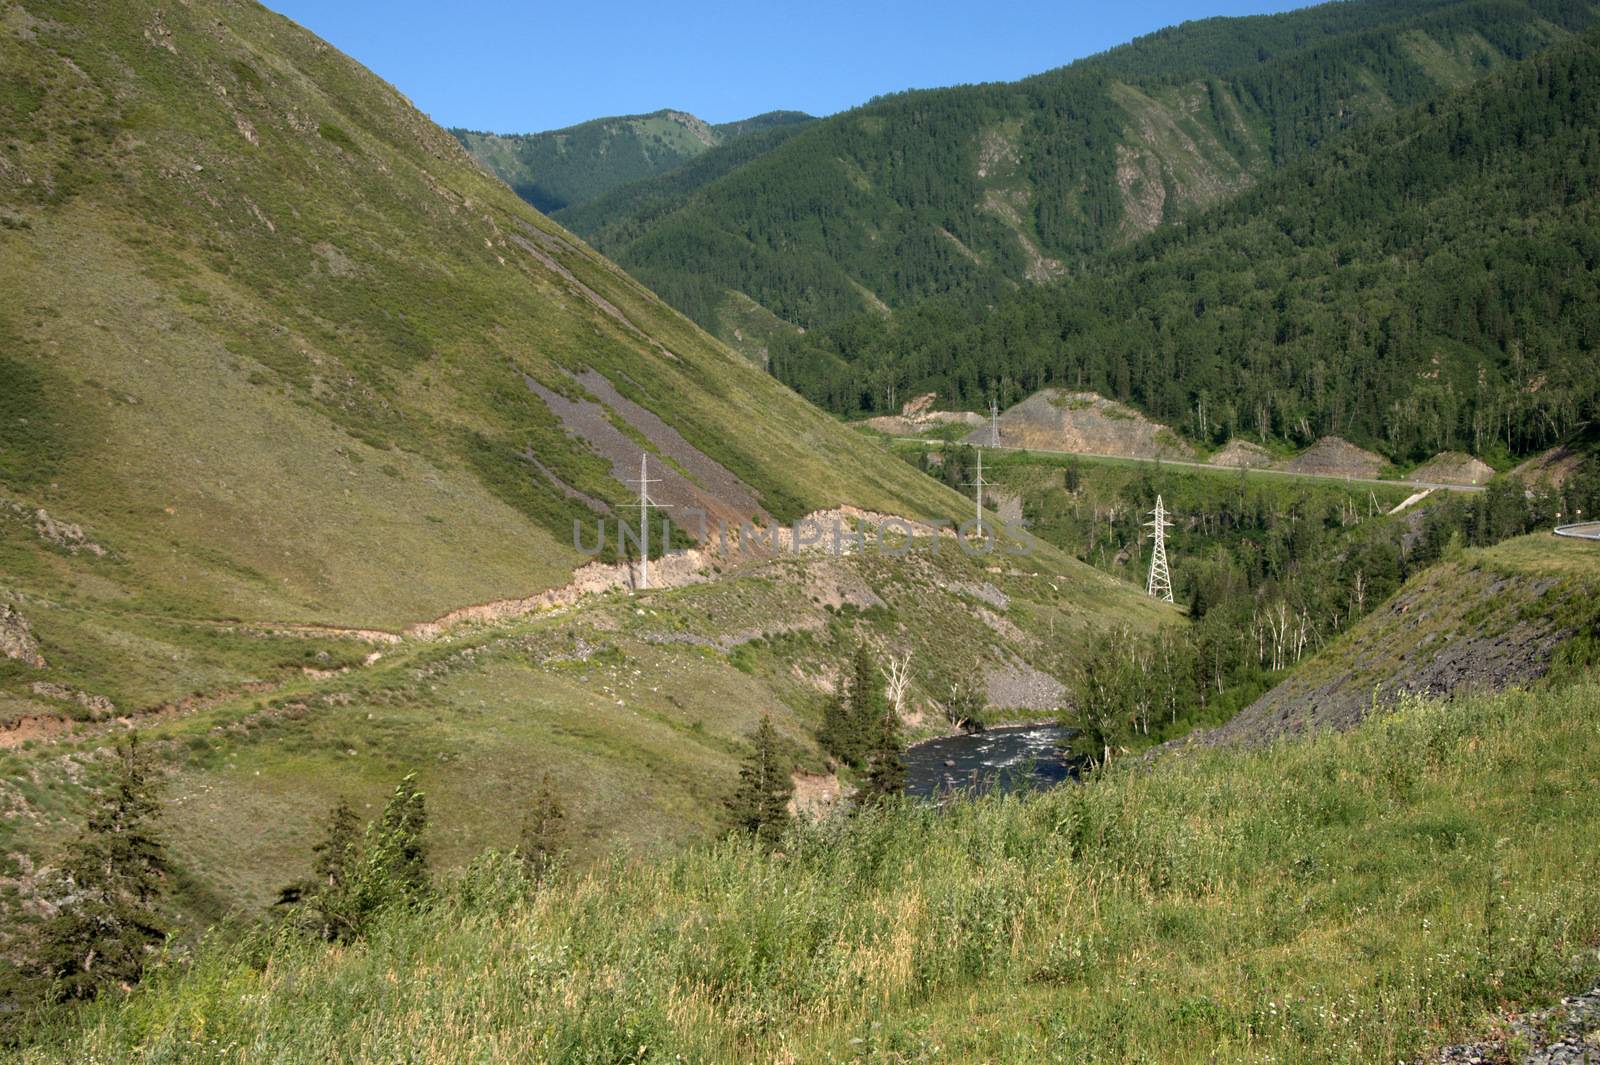 A power line stretching through a picturesque valley at the foot of a forested mountain.